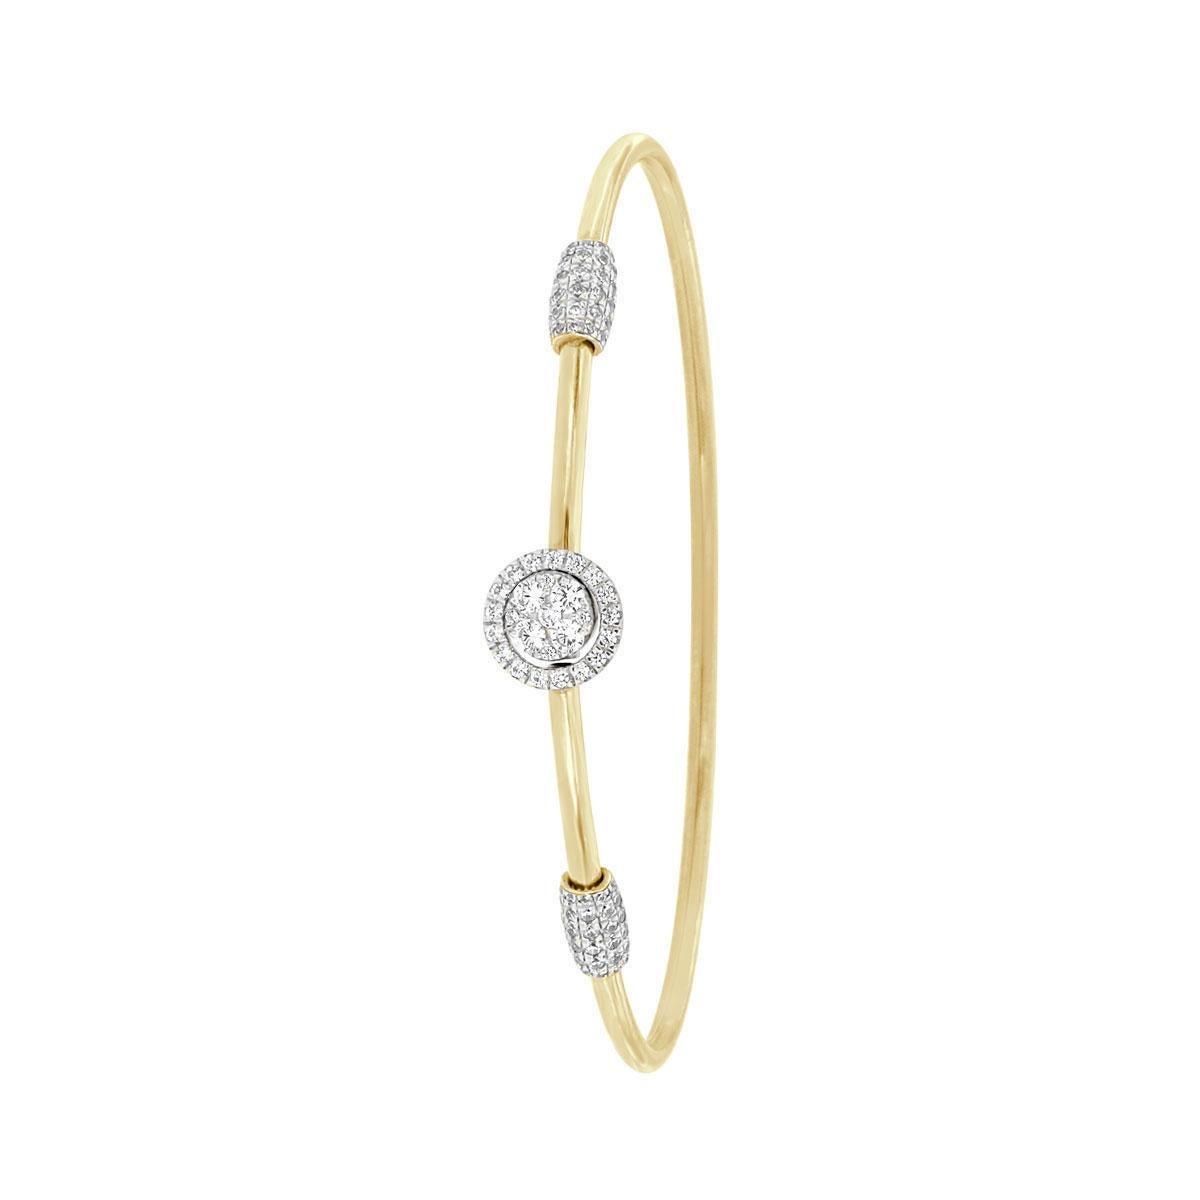 This fashionable flex bangle features round brilliant diamonds micro-prong-set in a round halo. Experience the difference!

Product details: 

Center Gemstone Type: NATURAL DIAMOND
Center Gemstone Color: WHITE
Center Gemstone Shape: ROUND
Center